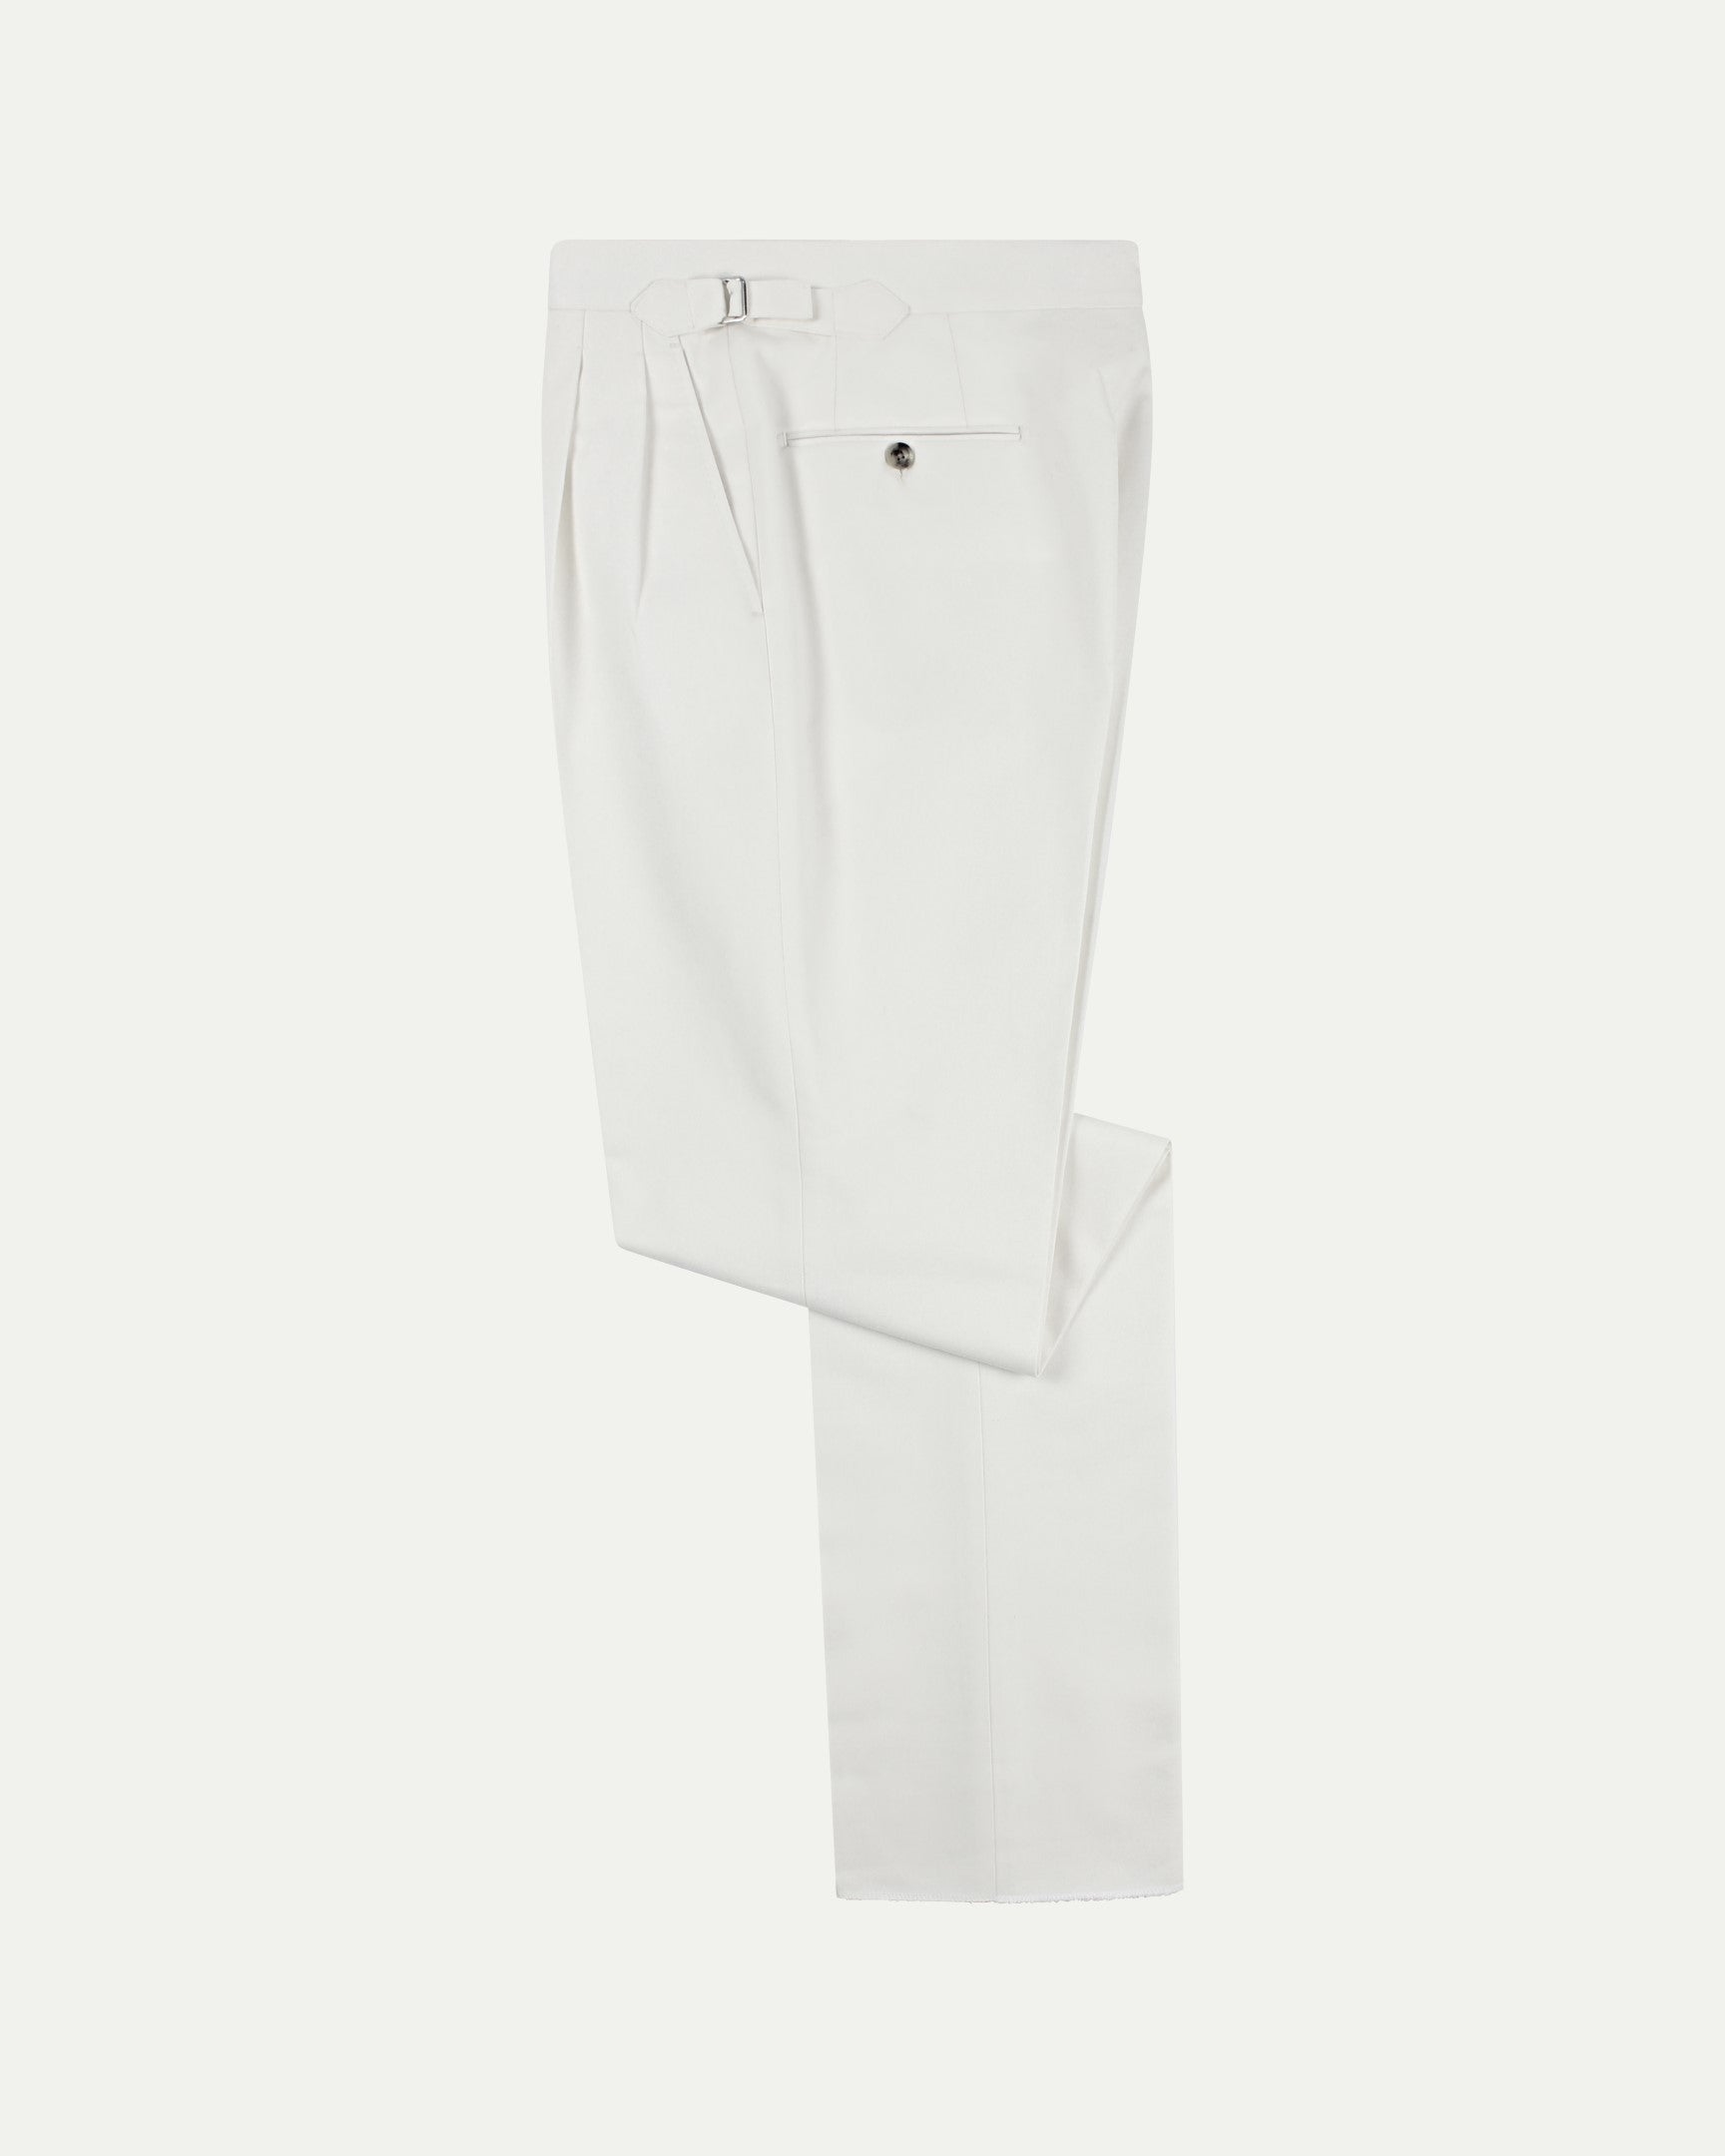 Made-To-Order Trousers in Off White Cotton Drill